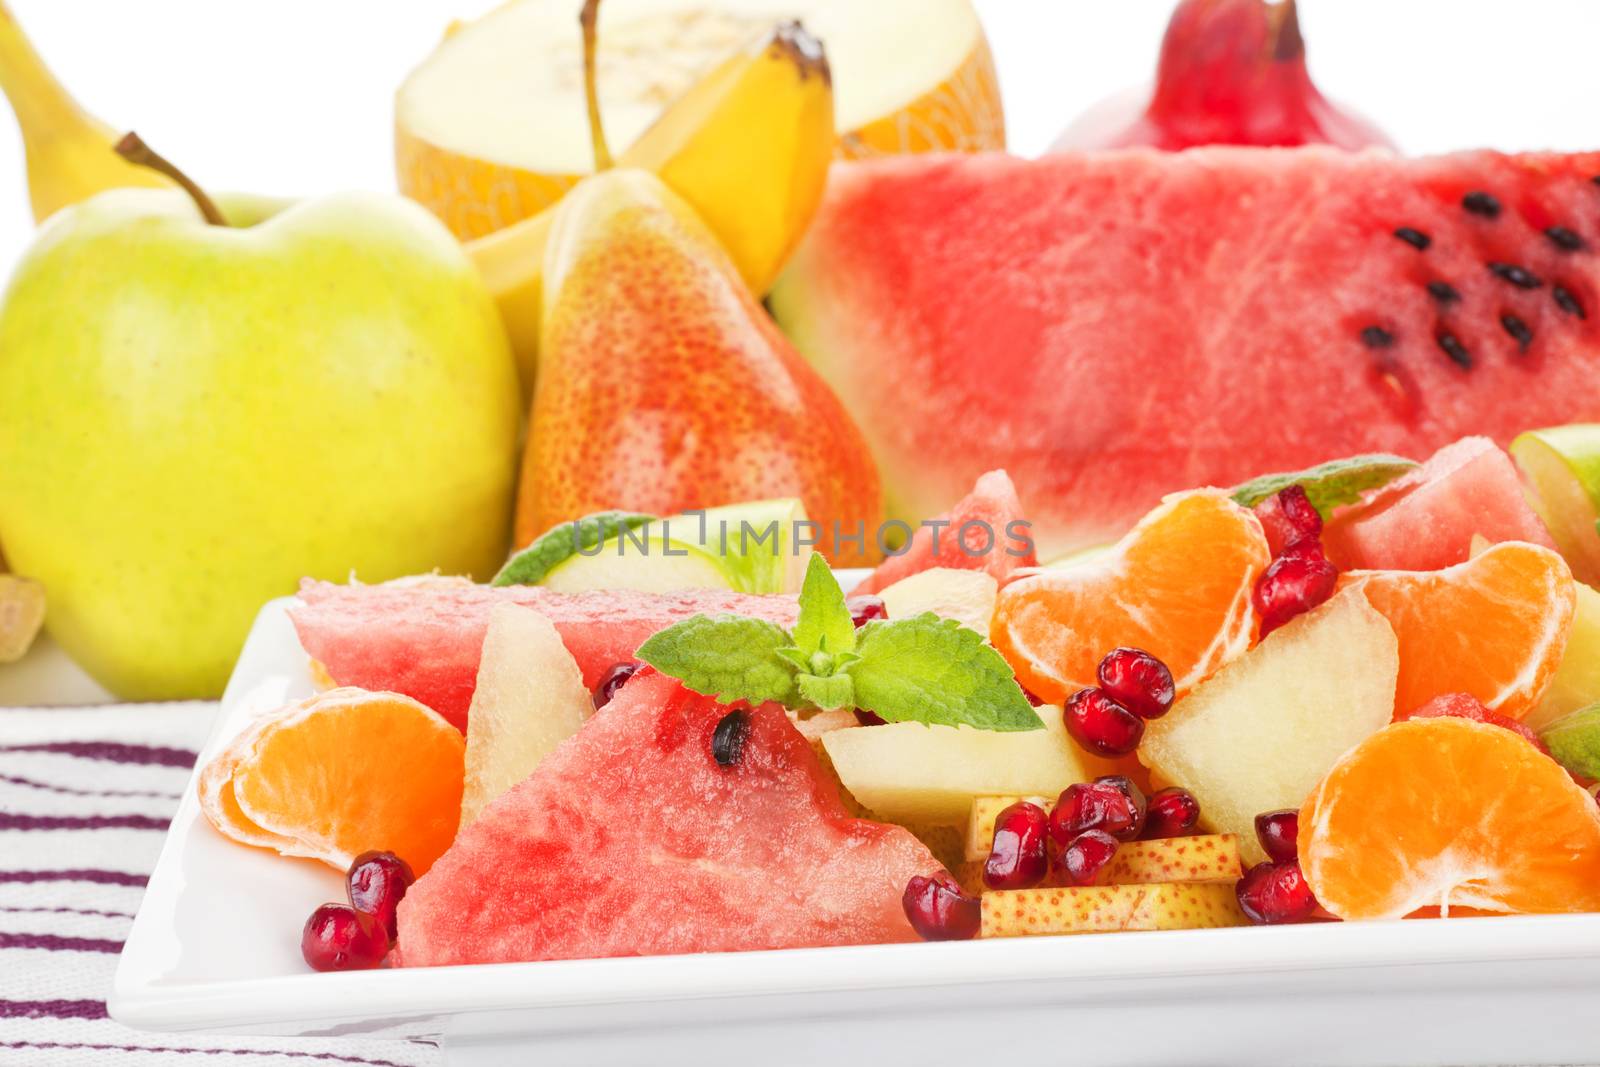 Delicious colorful fruit salad close up. Fruits in background. Light summer food. The greatest wealth is health.  ~Virgil